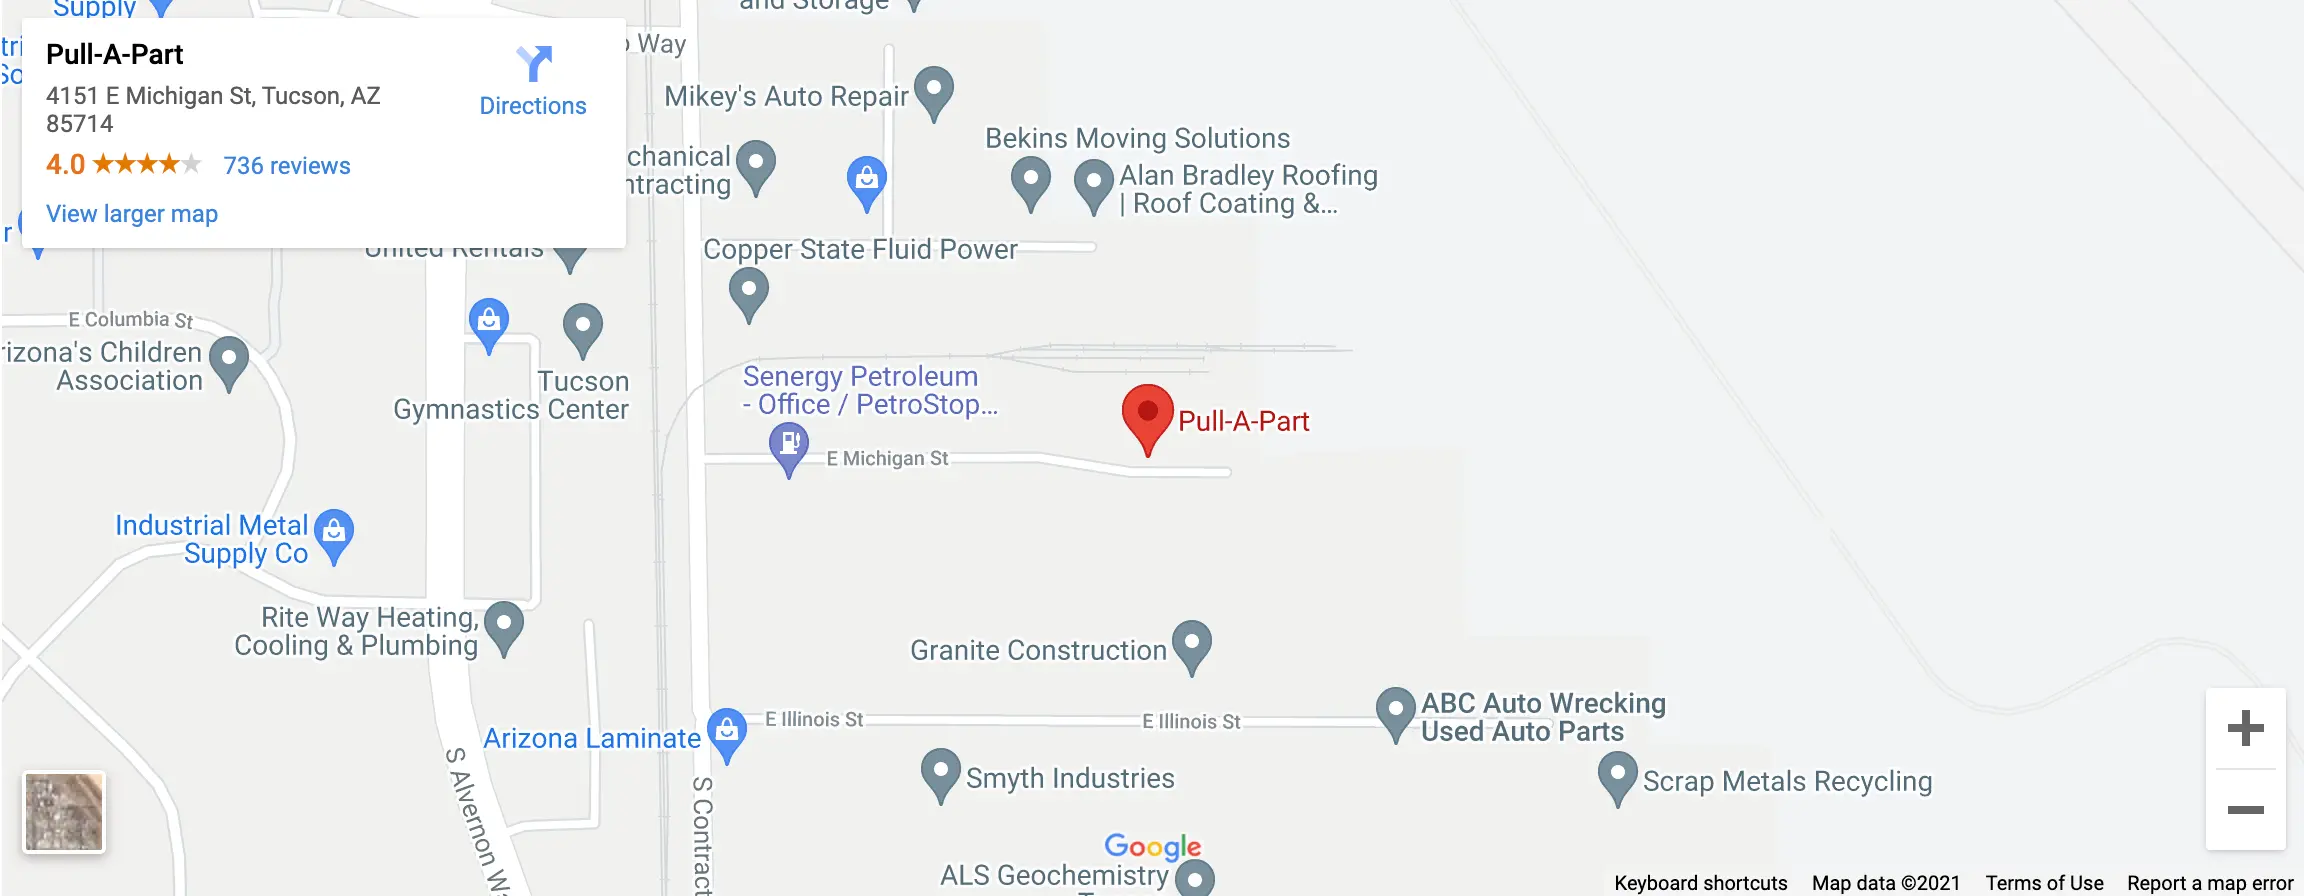 Get Directions to Pull-A-Part Tucson